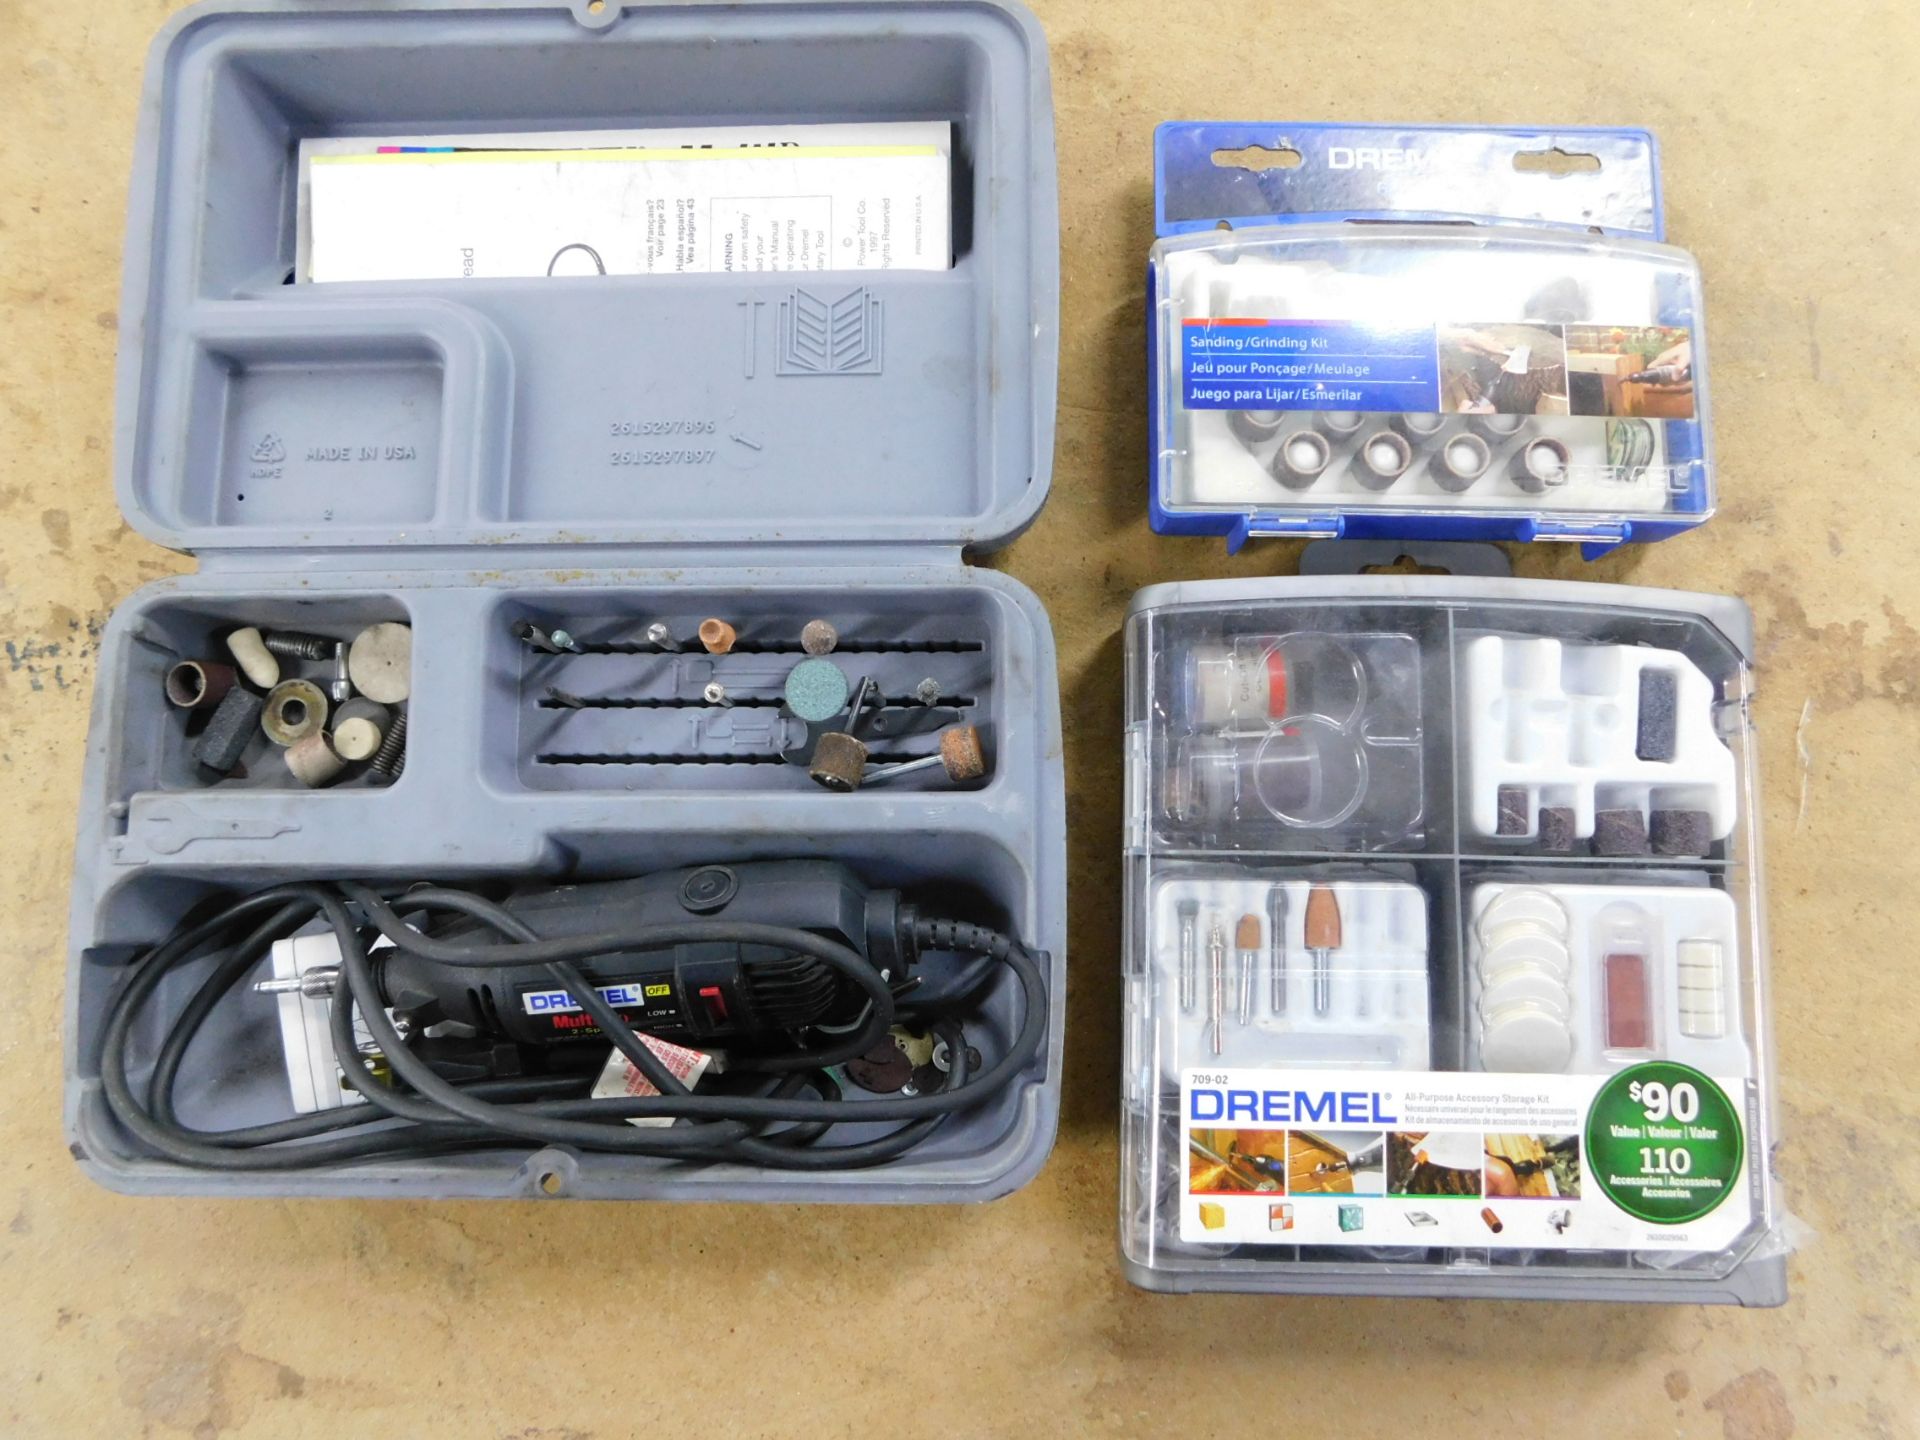 Dremel Tool and Accessories